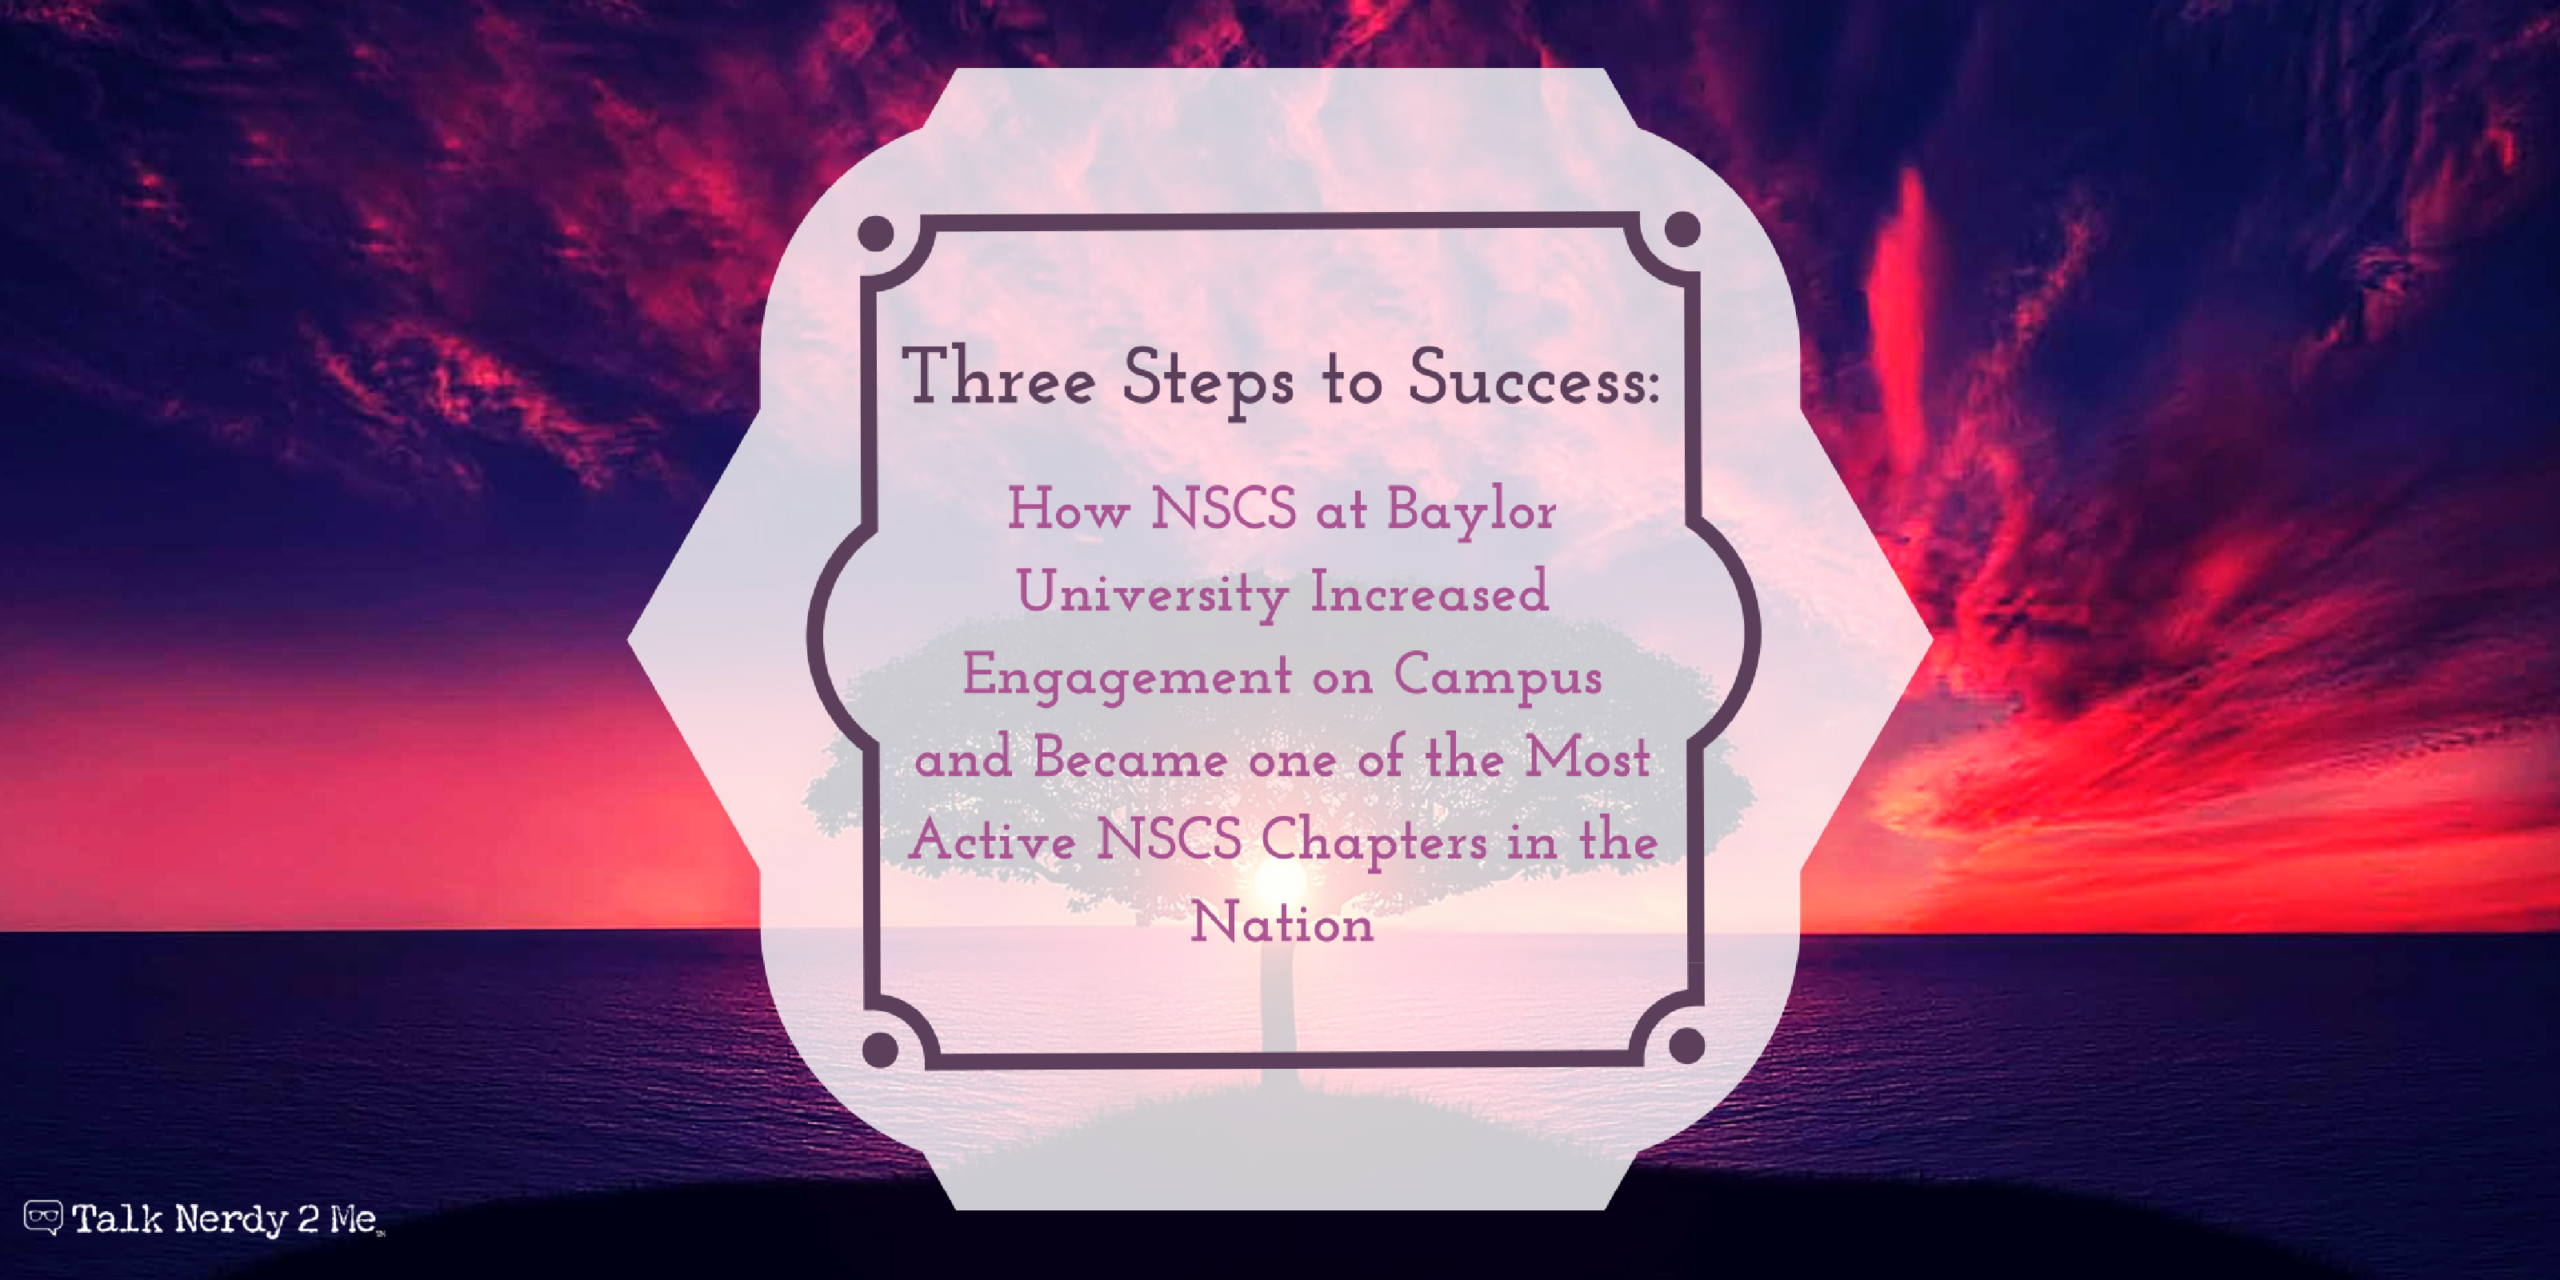 Three Steps to Success: How NSCS at Baylor University Increased Engagement on Campus and Became one of the Most Active NSCS Chapters in the Nation